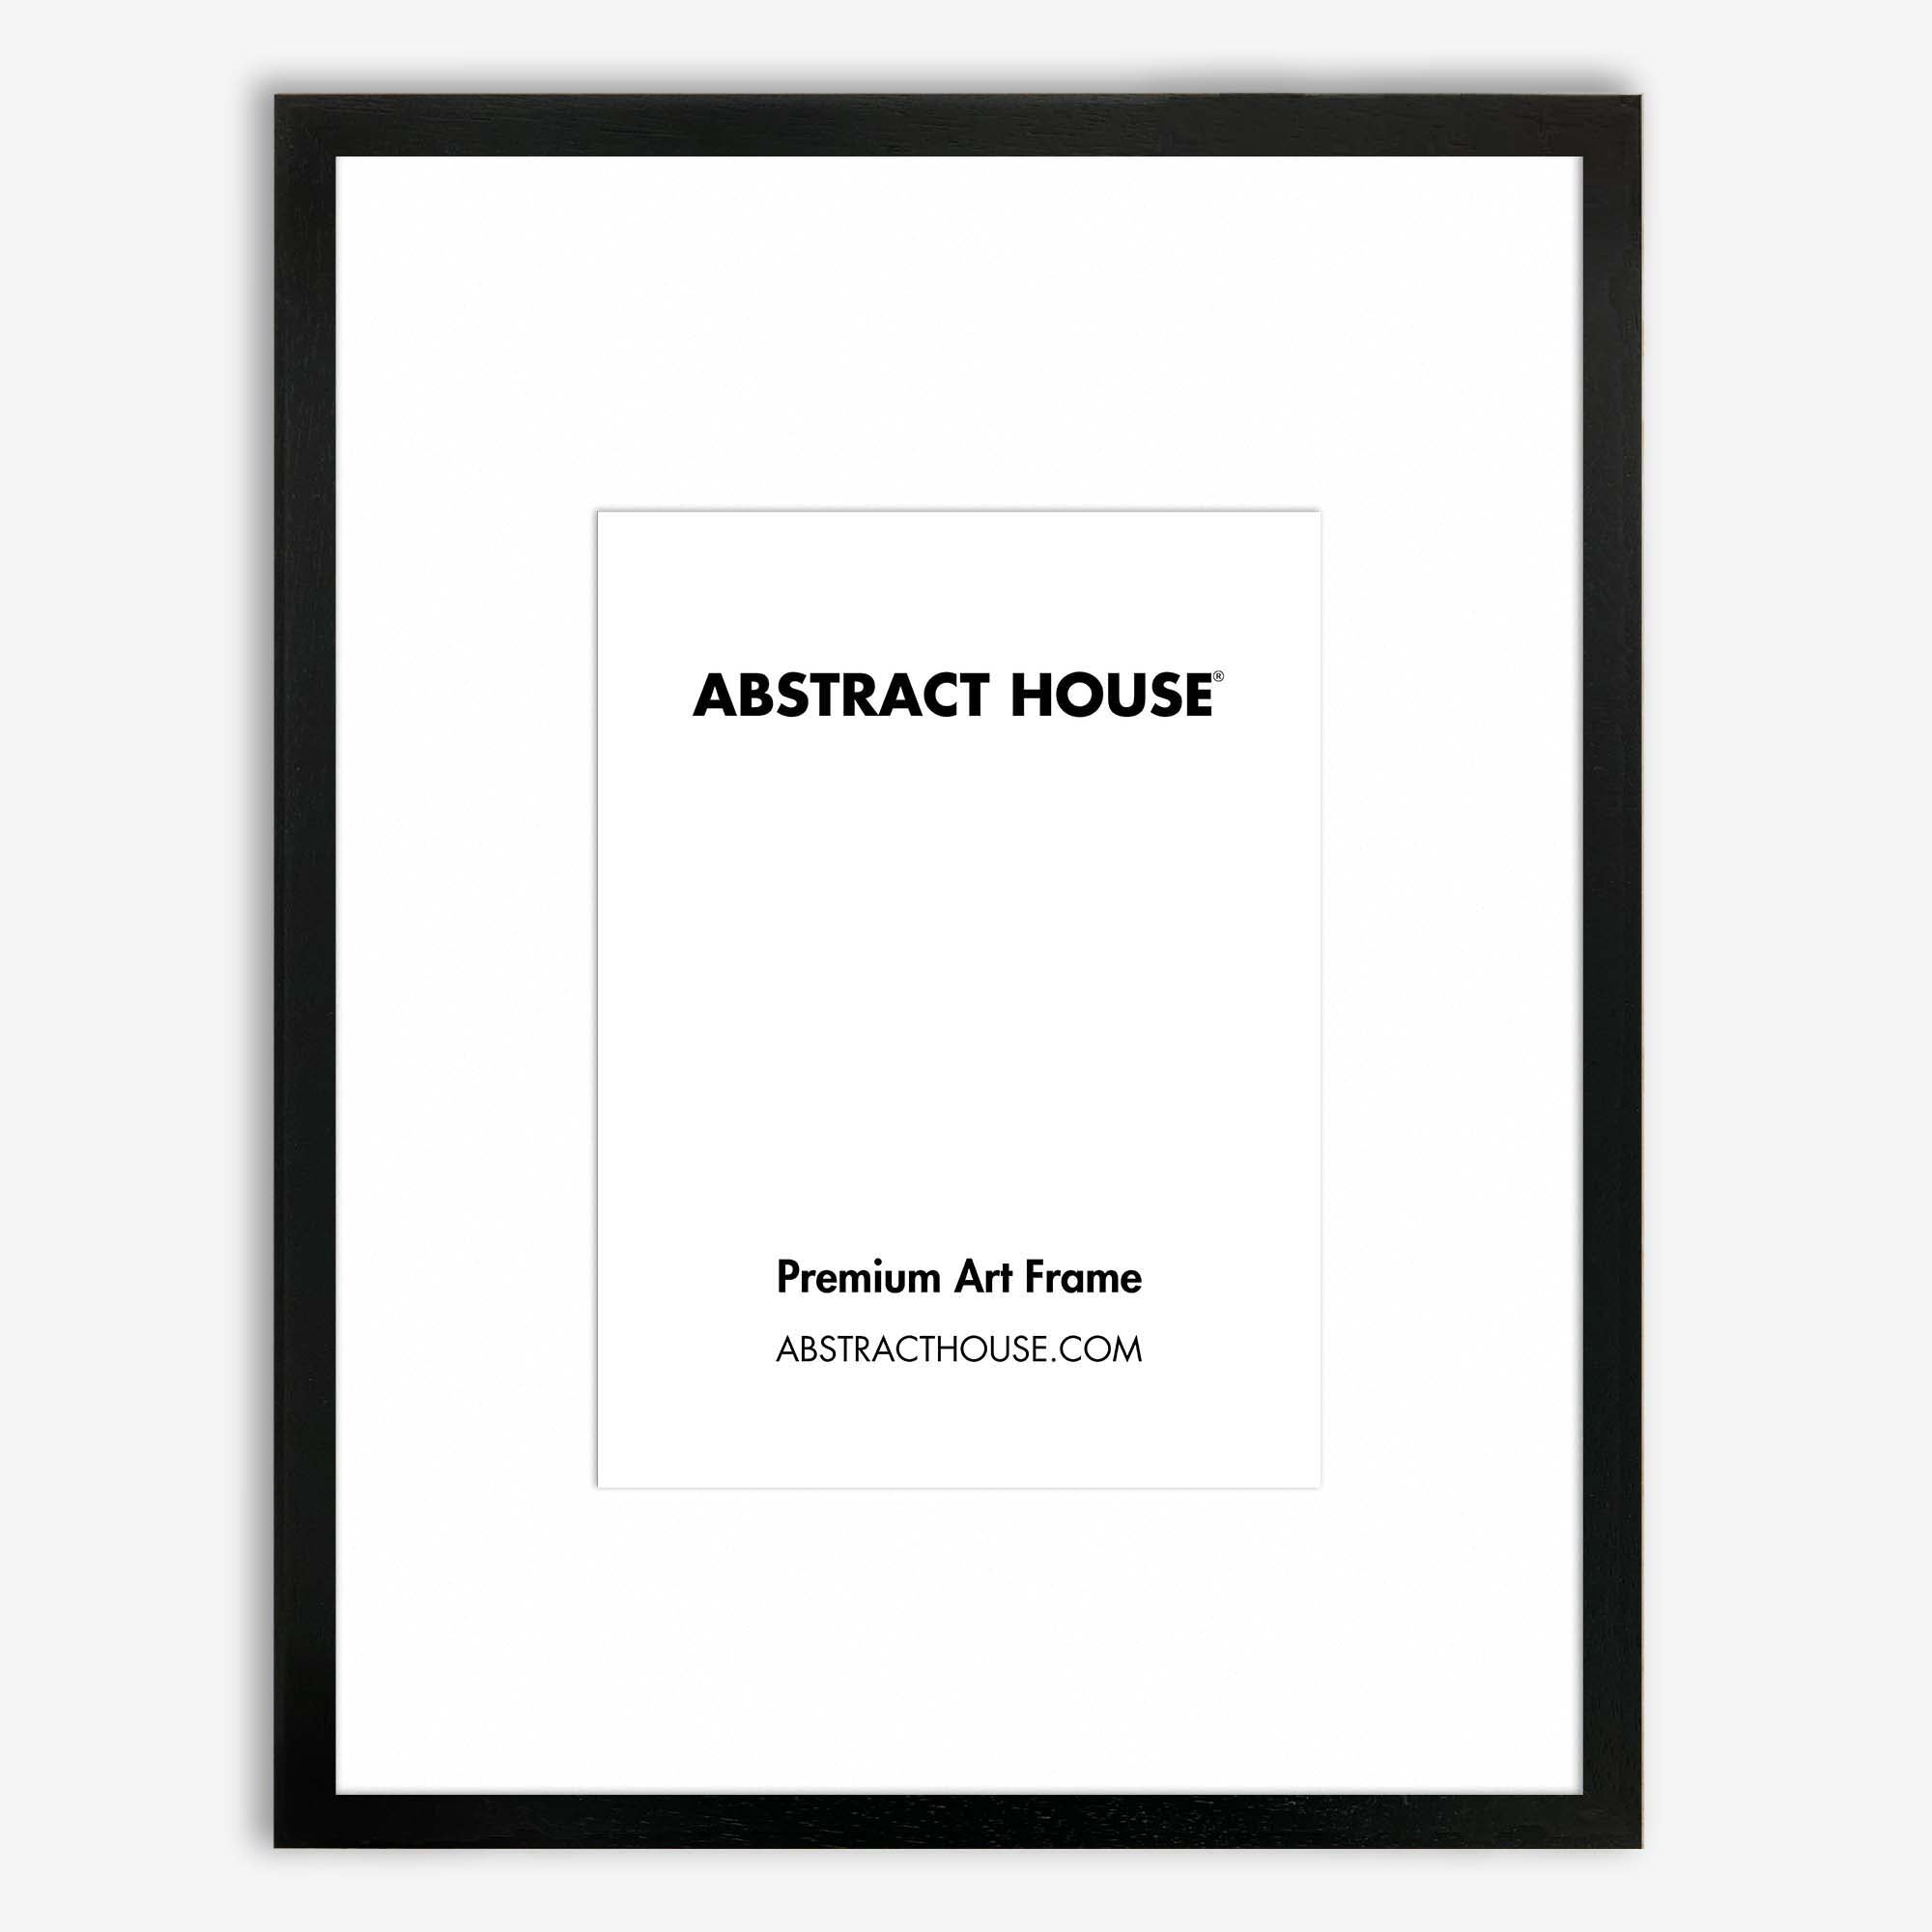 50x70cm Wooden Picture Frame-Black-30 x 40 cm-Abstract House